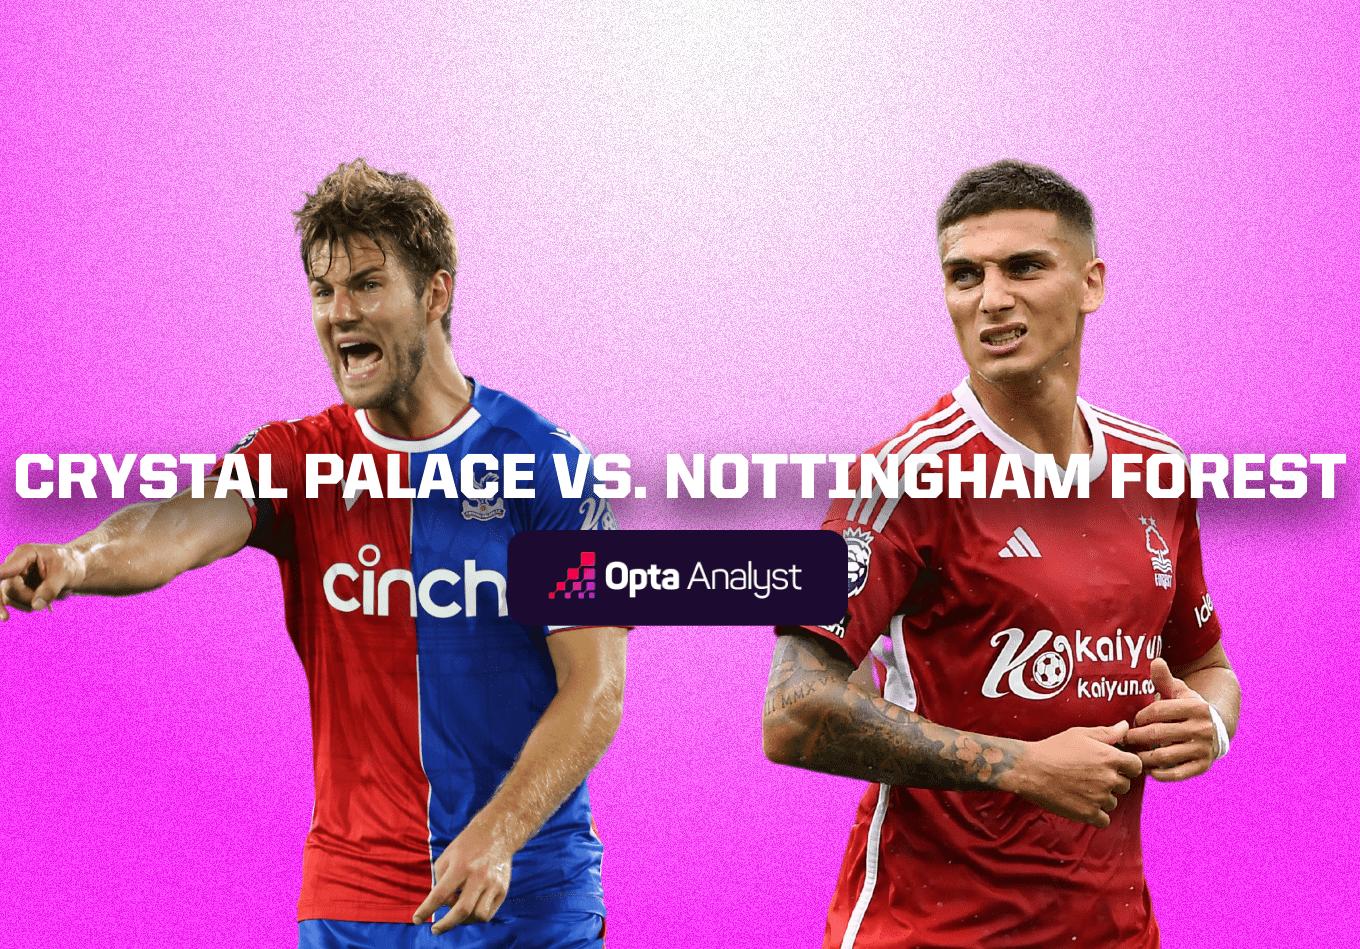 Crystal Palace vs Nottingham Forest: Prediction and Preview